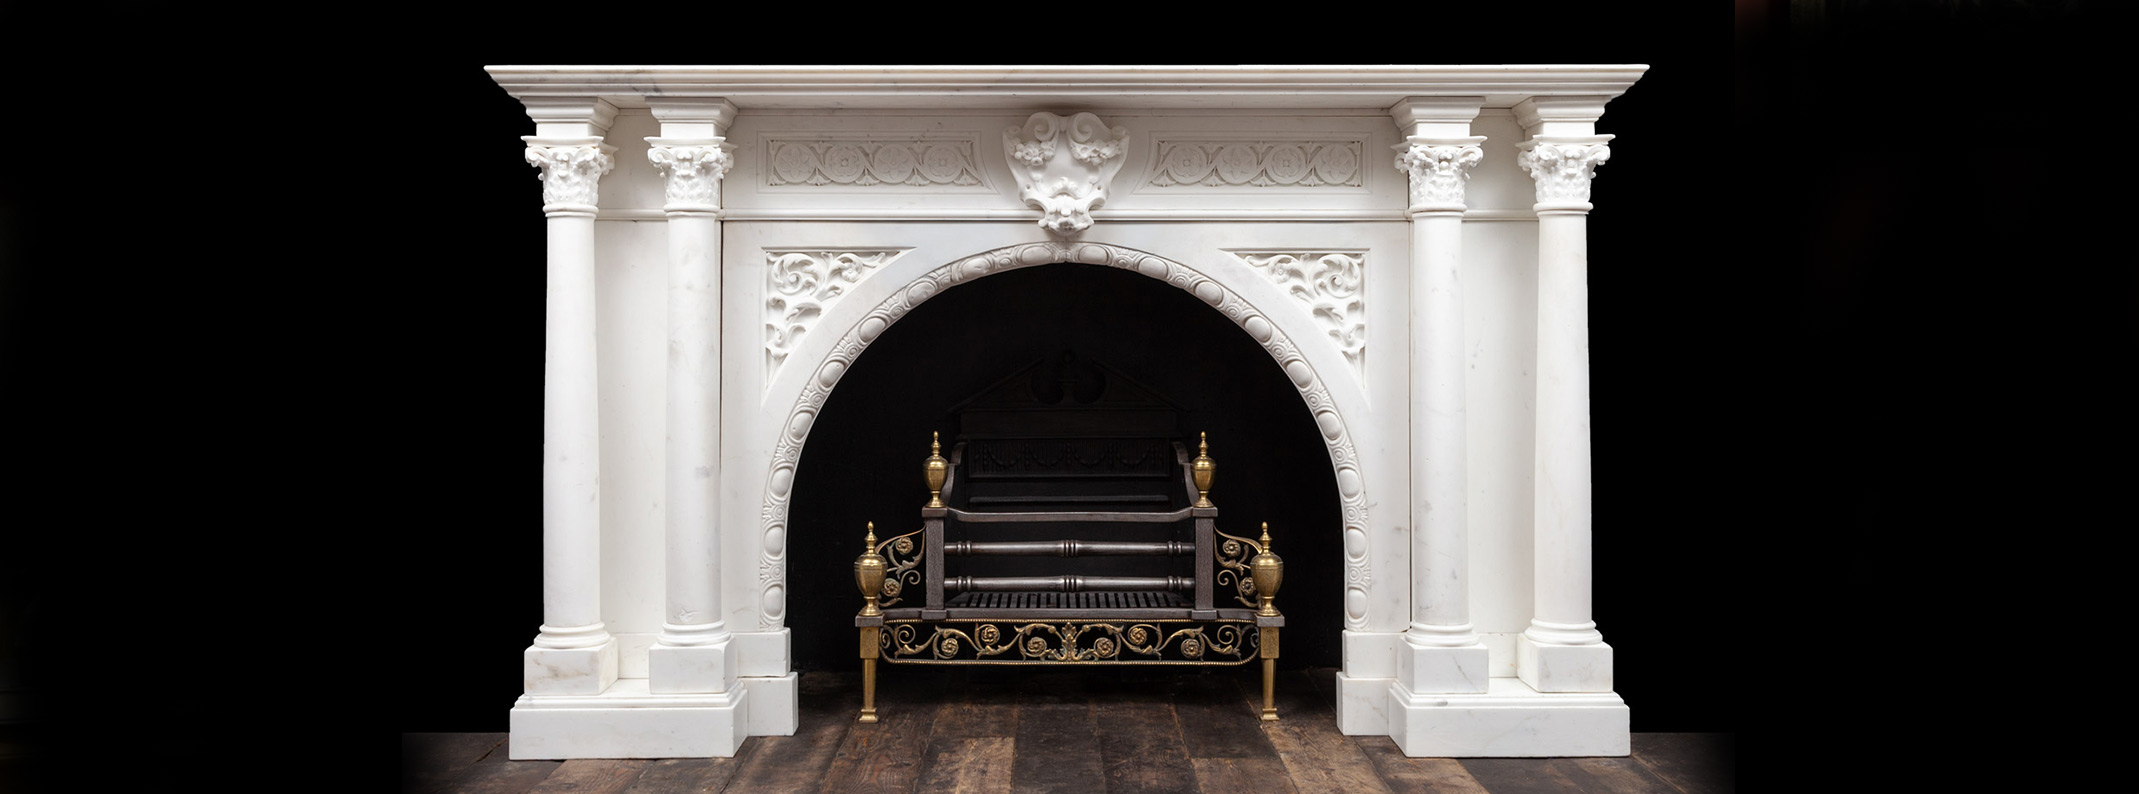 Aongking Carving Department Arched Marble Fireplace Mantel